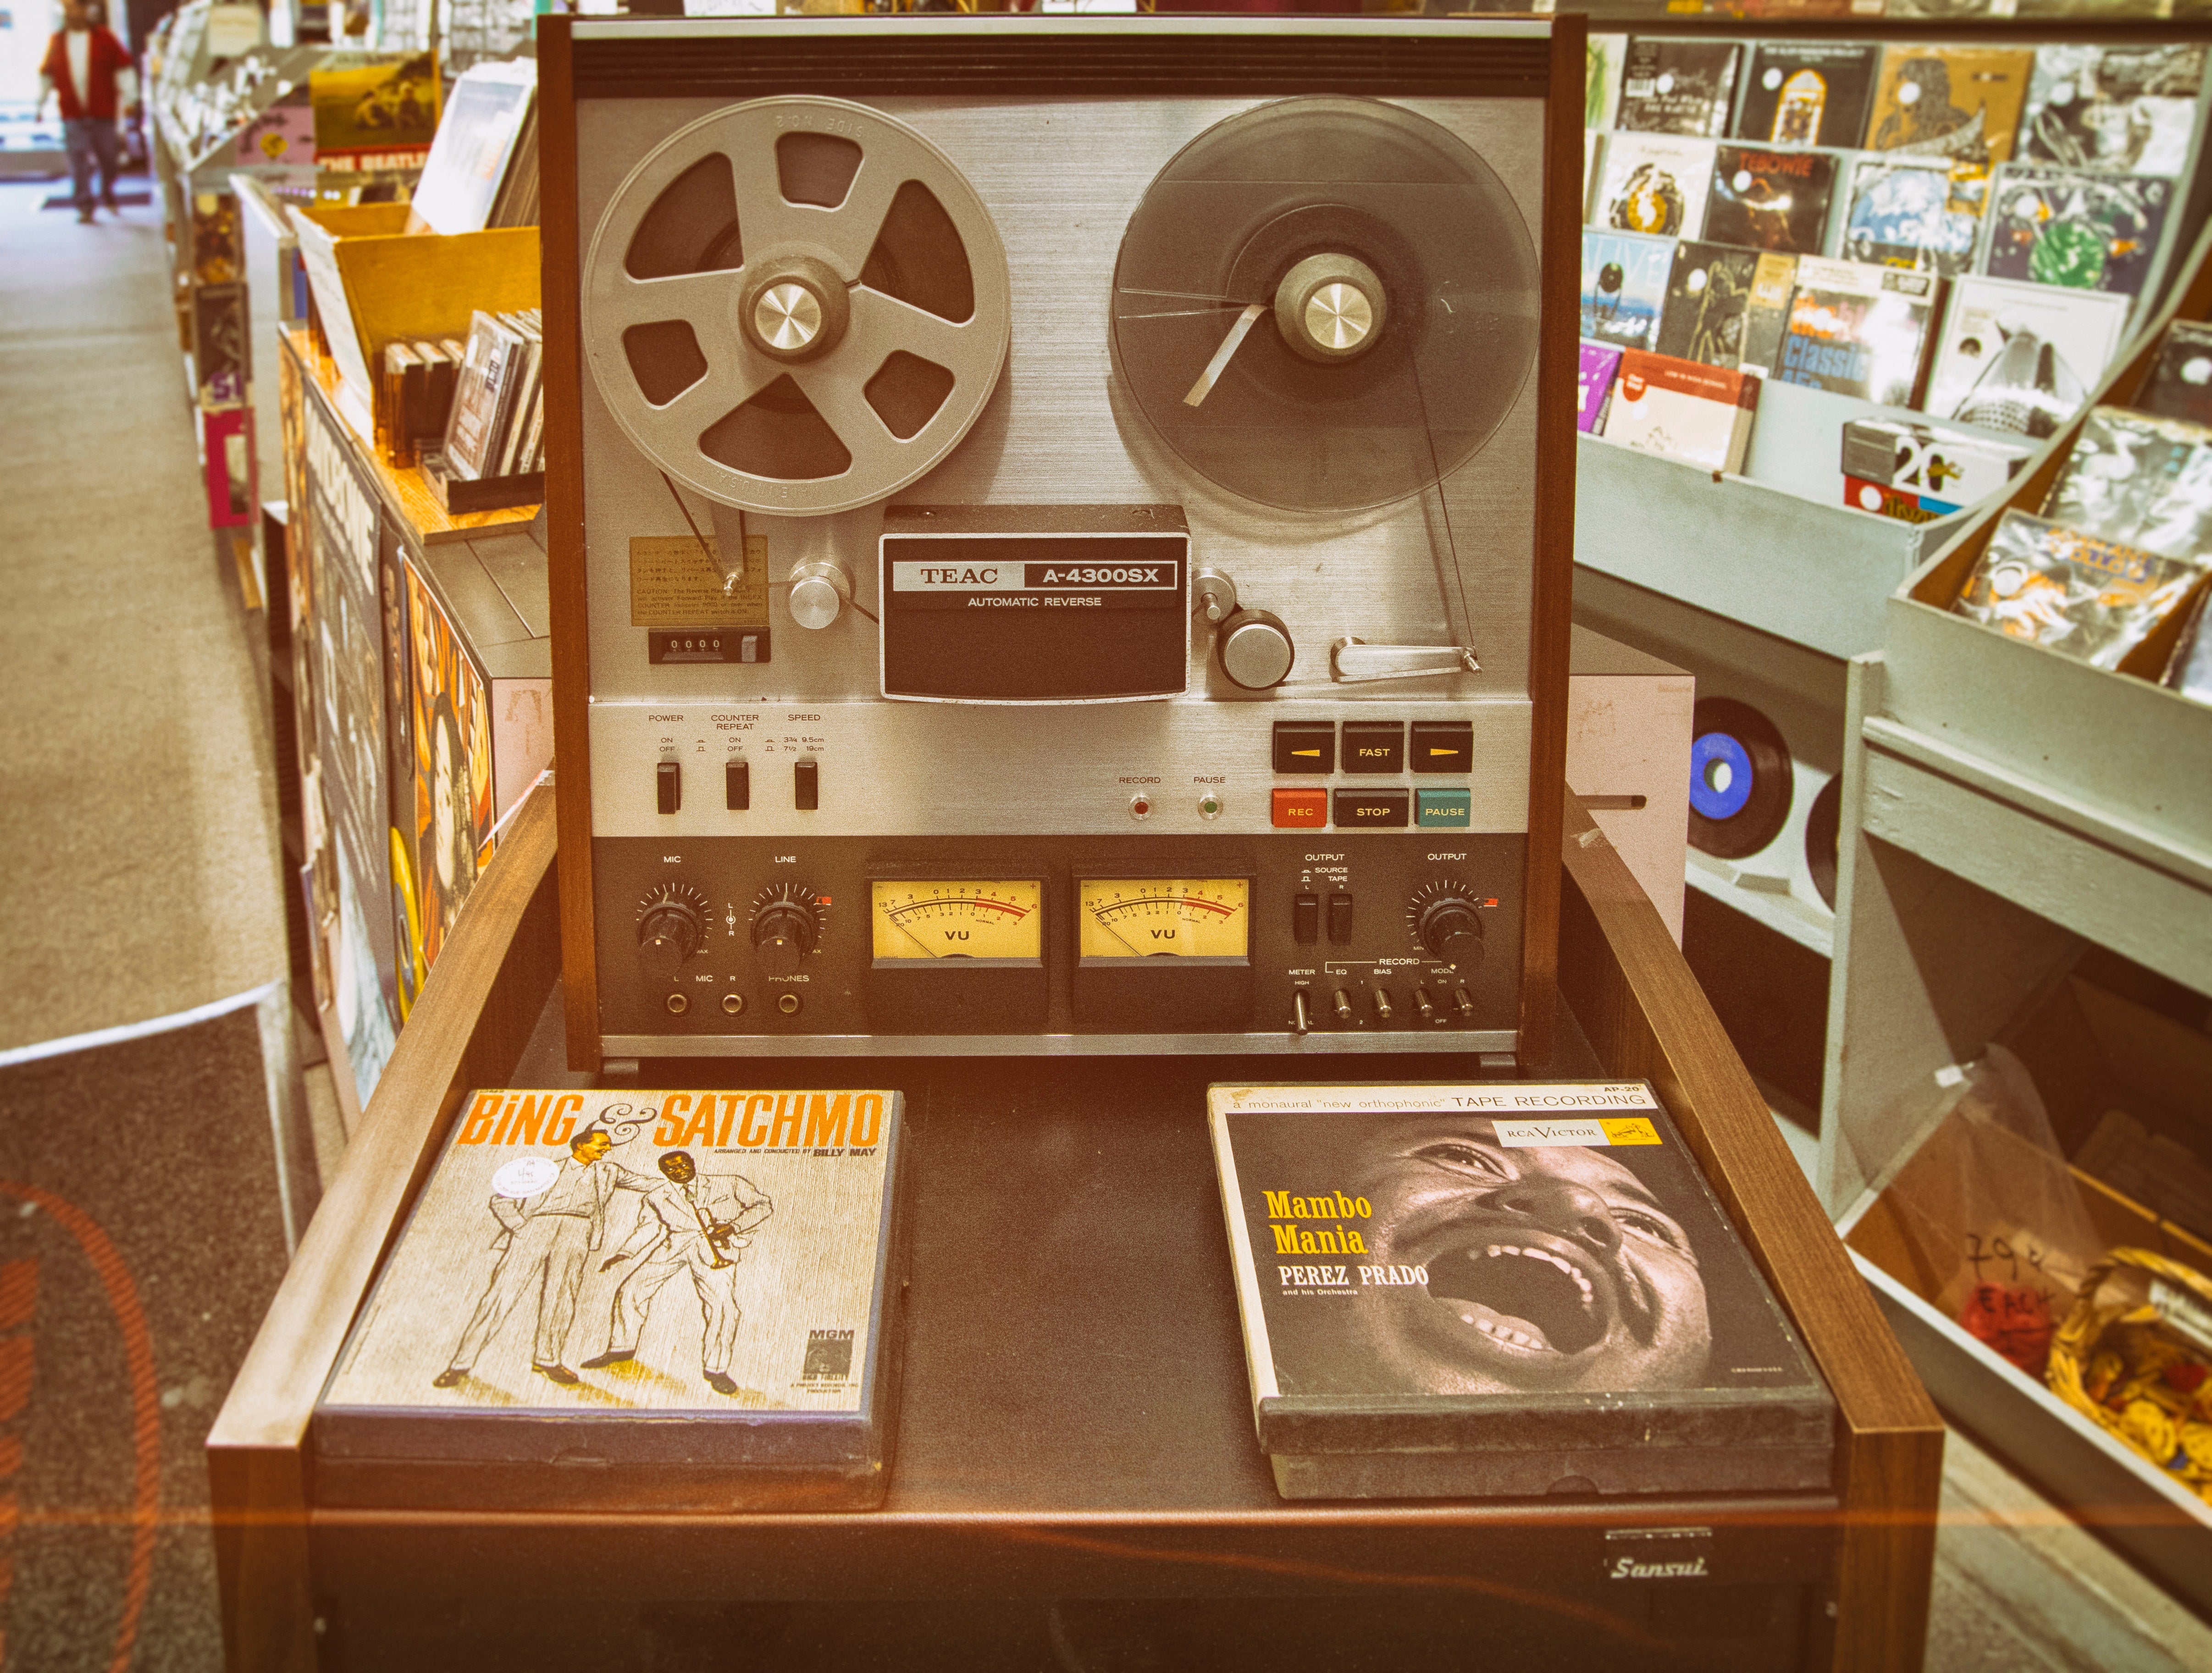 Reel-to-Reel was for me the best solution to keep music recordings